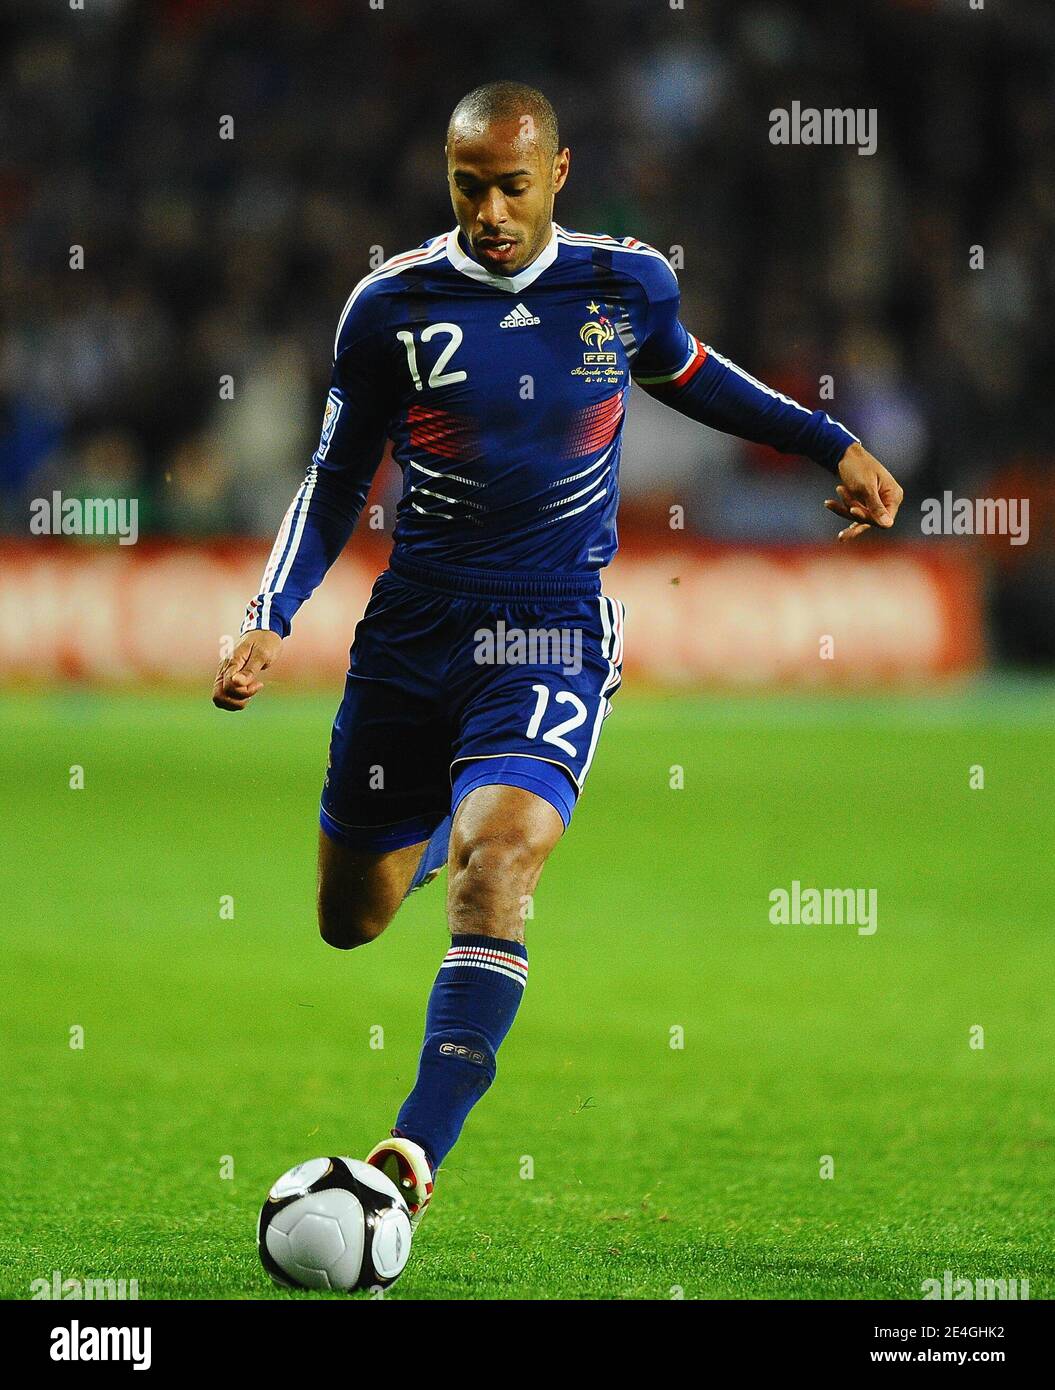 France's Thierry Henry in action during the World Cup 2010 Qualifying Play off soccer match, Ireland vs France at Croke Park stadium in Dublin, Ireland on November 14, 2009. France won 1-0. Photo by Steeve McMay/ABACAPRESS.COM Stock Photo